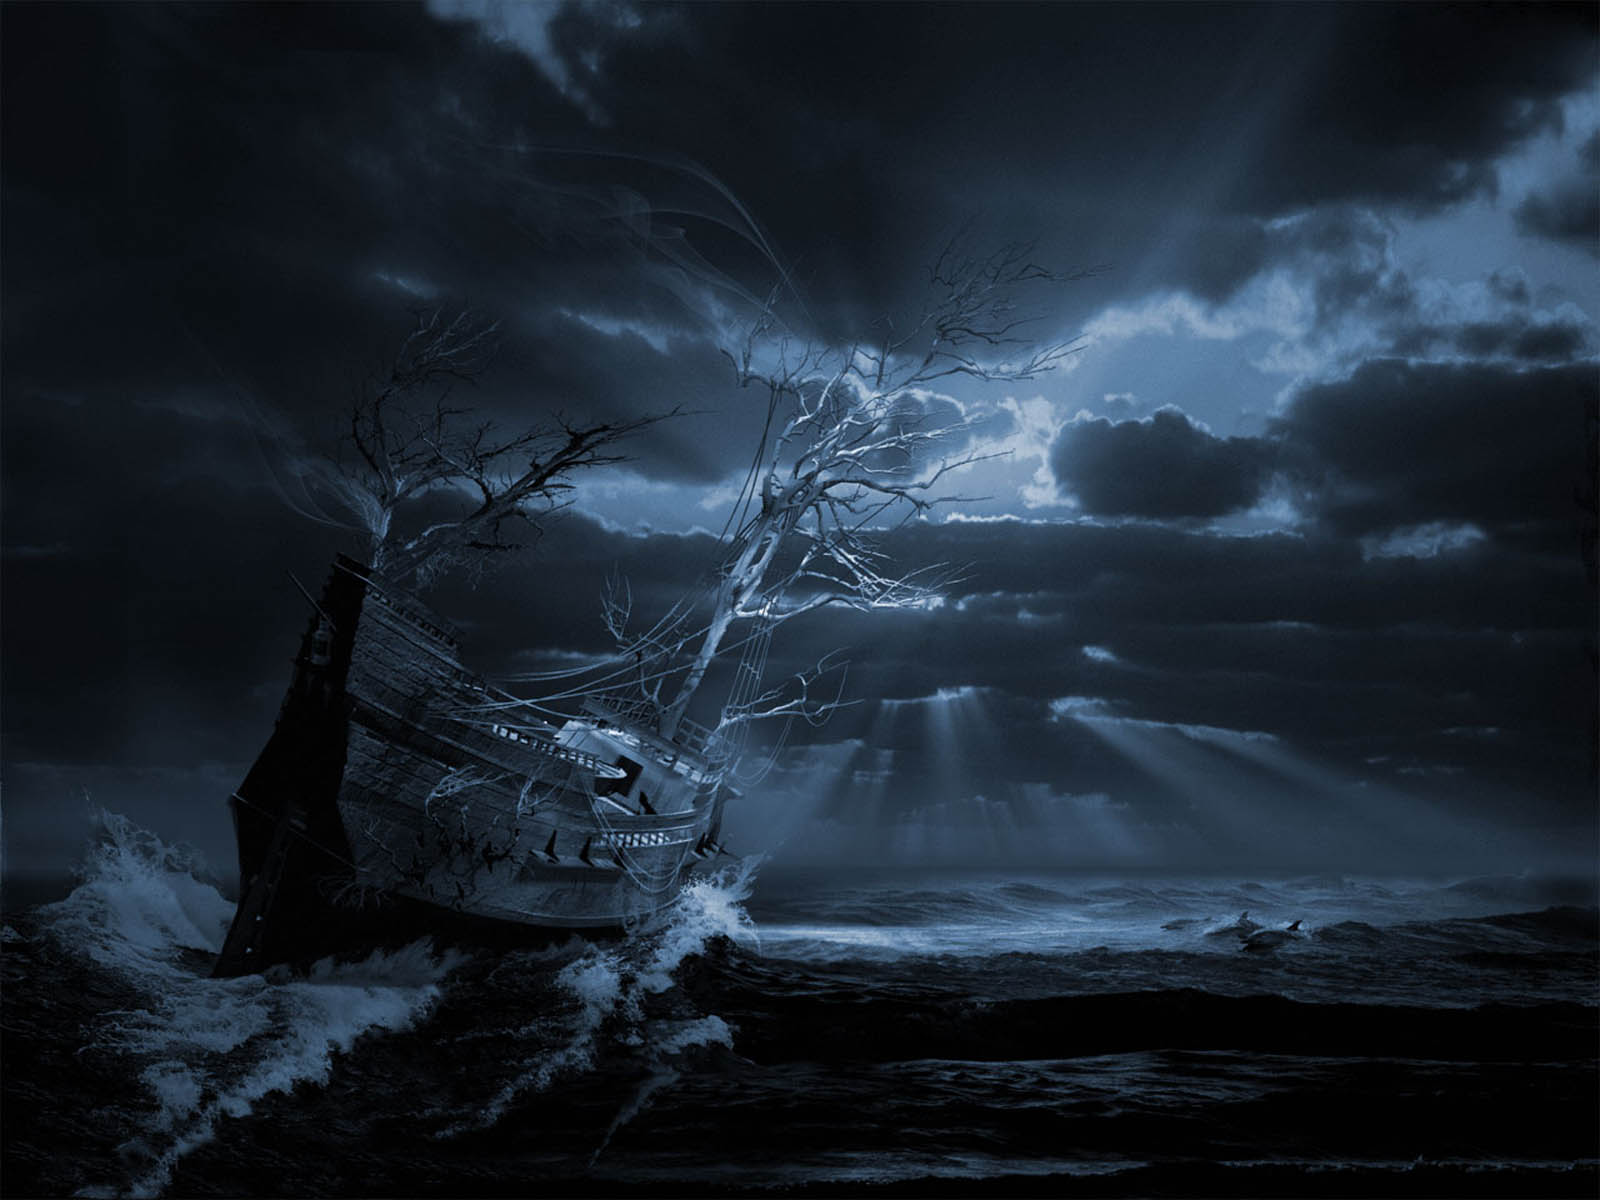 Tag Ghost Ship Wallpaper Image Photos Pictures And Background